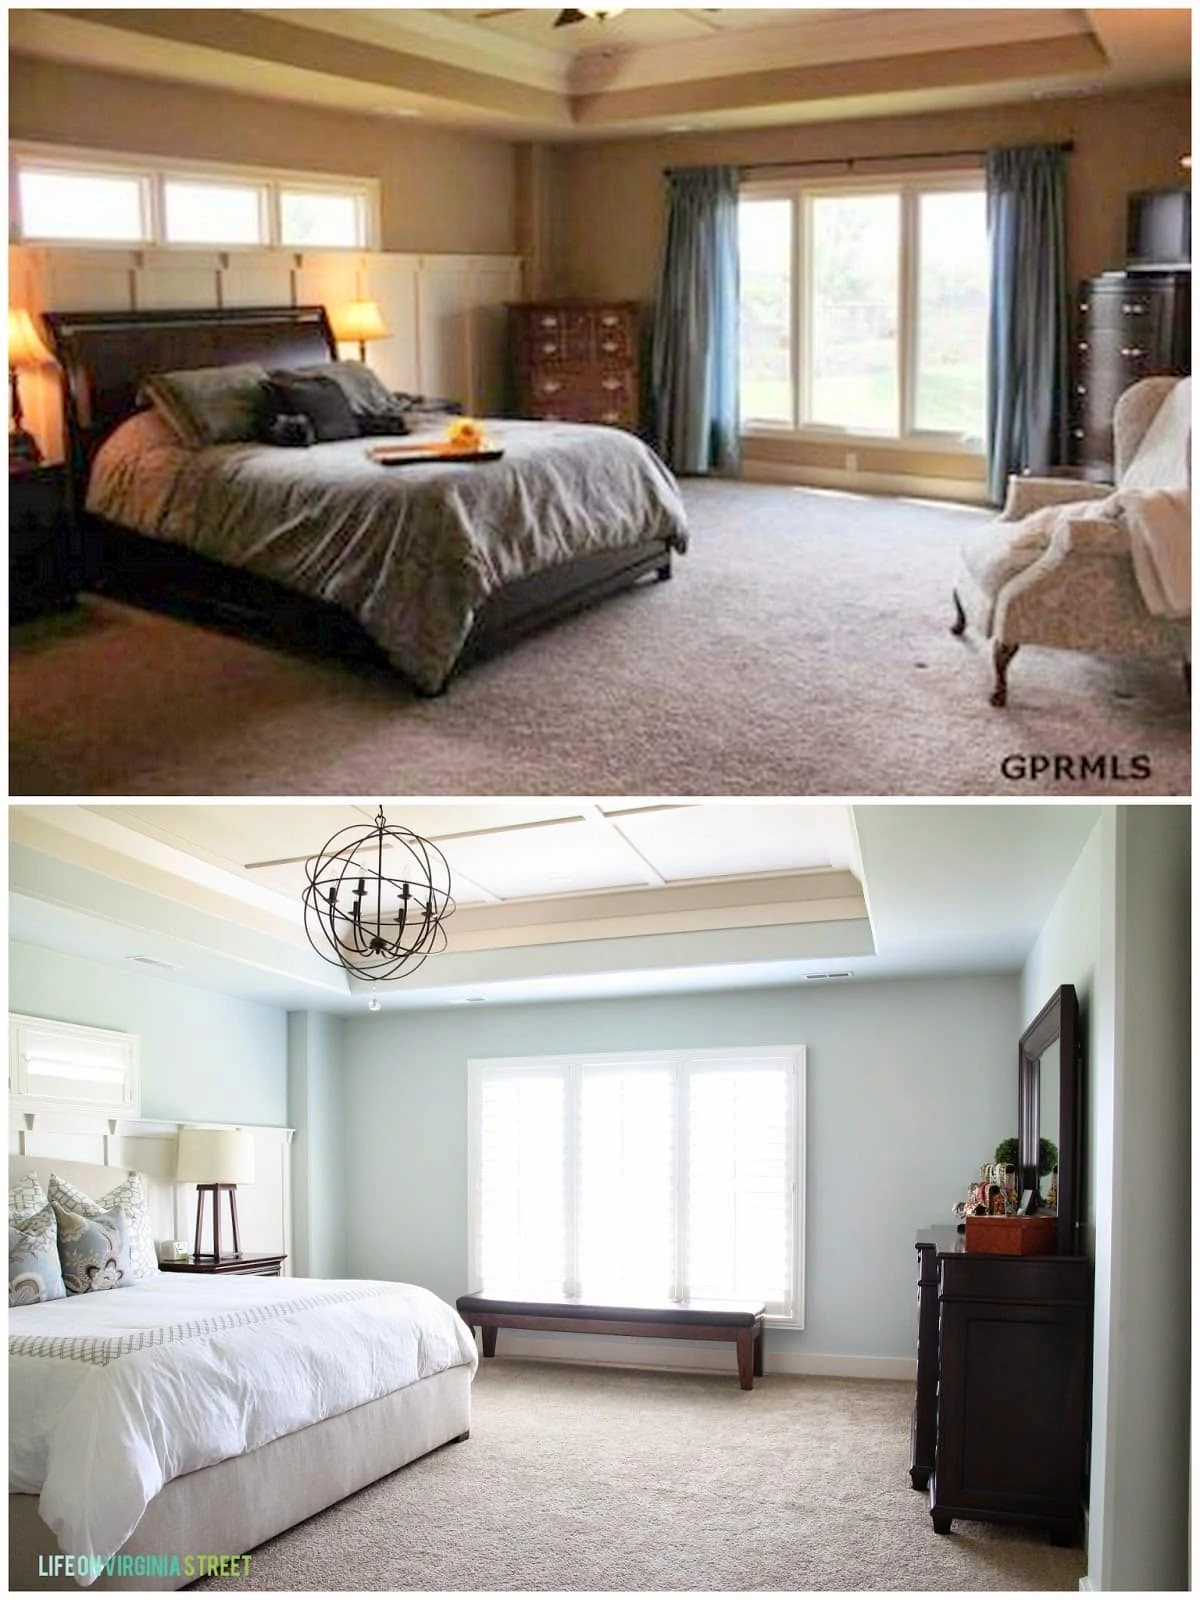 First picture of the bedroom in a yellowish tone with master bed and dressers, and the second picture with the walls painted in the sea salt and master bedroom all brightened up.